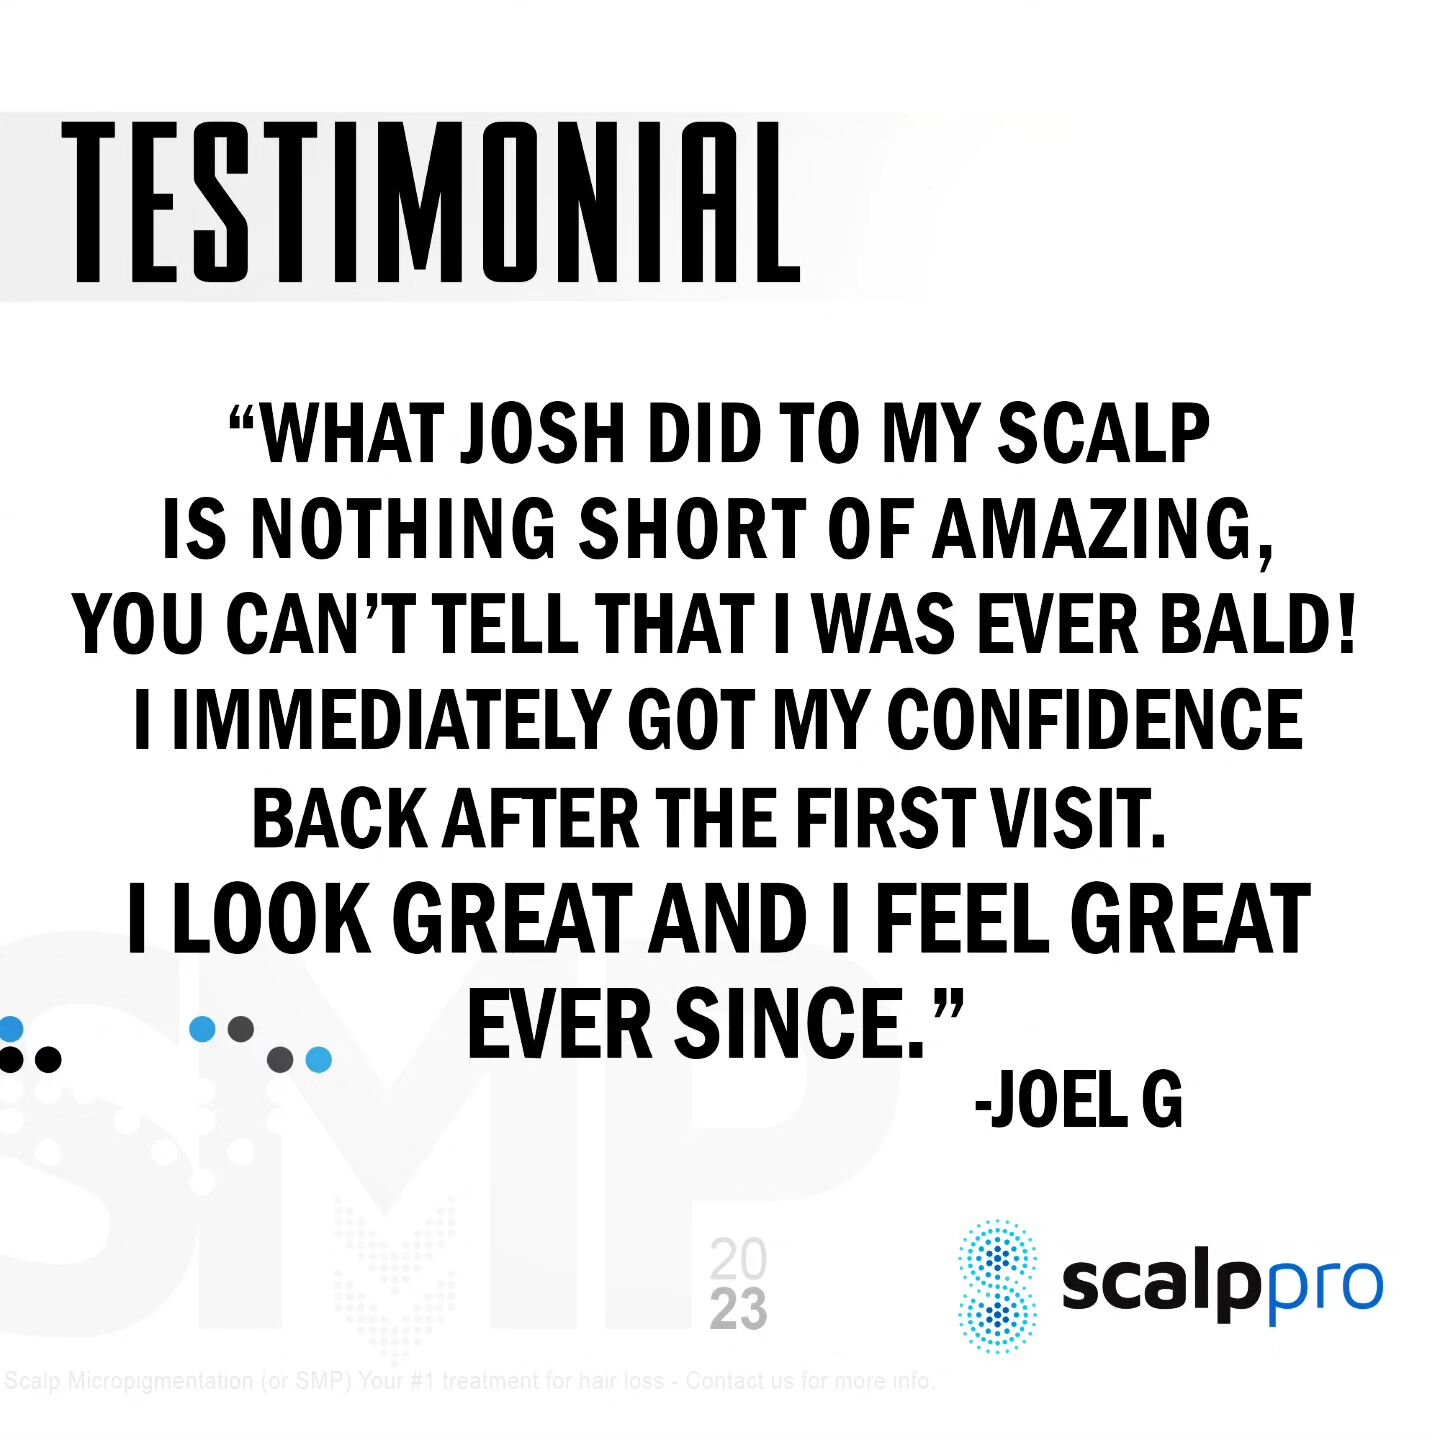 Testimonial from a recent client 🙏At Scalp Pro we strive to make your experience one that has meaning as well as amazing results 💯 

#smp #testimonial #hairtattoo #scalptattoo #hairtransformation #hairlosstreatment #tattoo #midwesttattoo #midwestsm